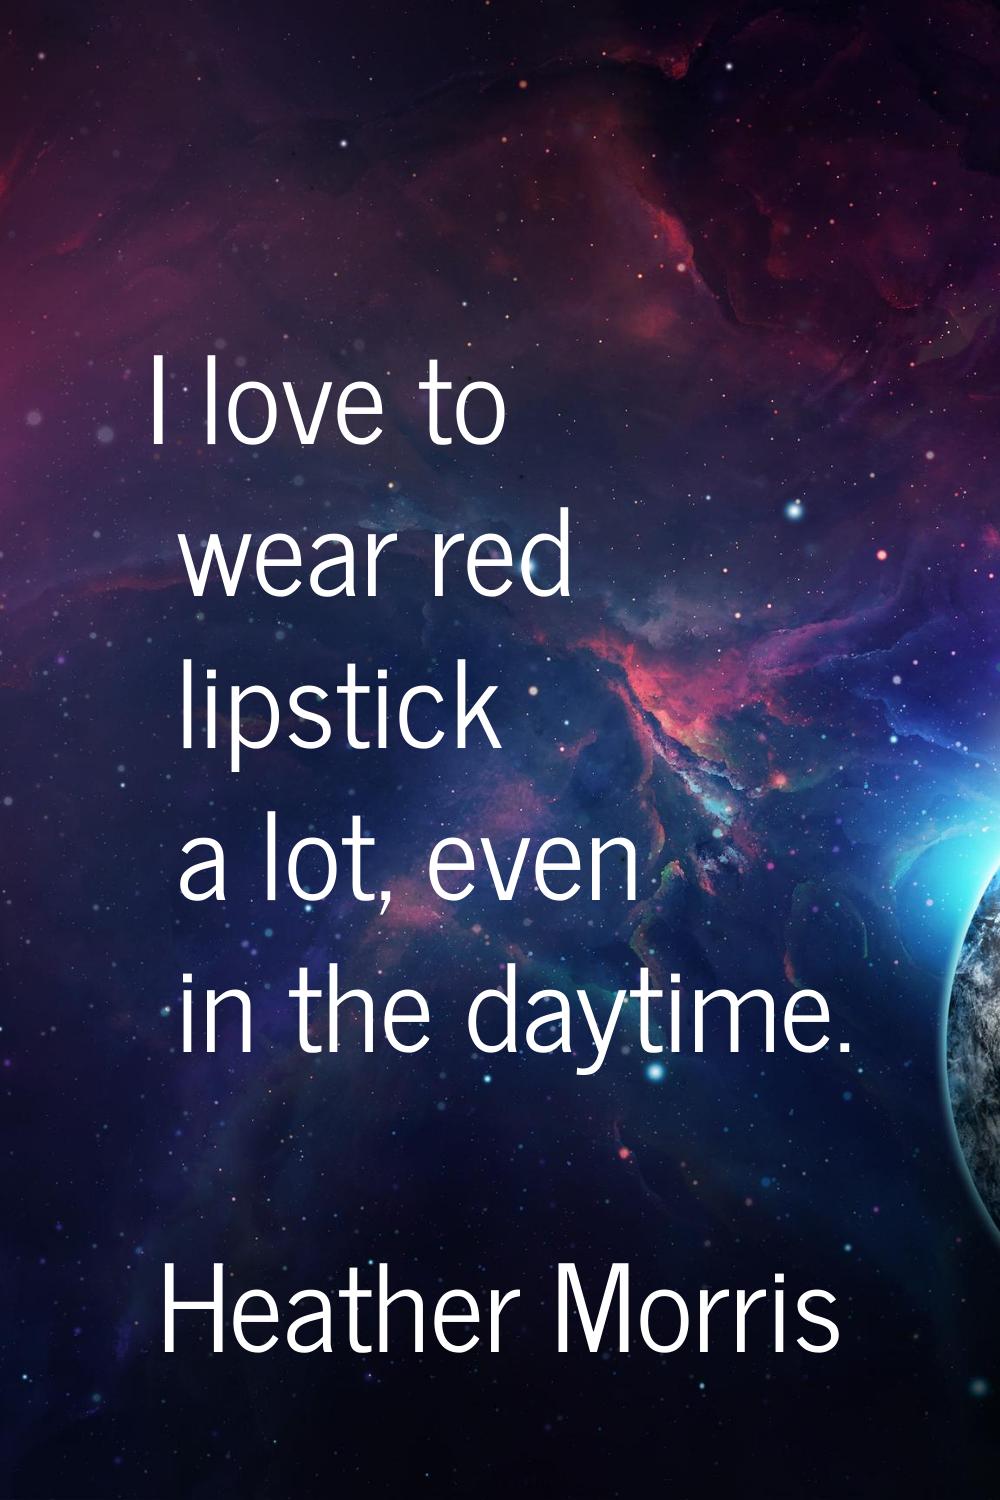 I love to wear red lipstick a lot, even in the daytime.